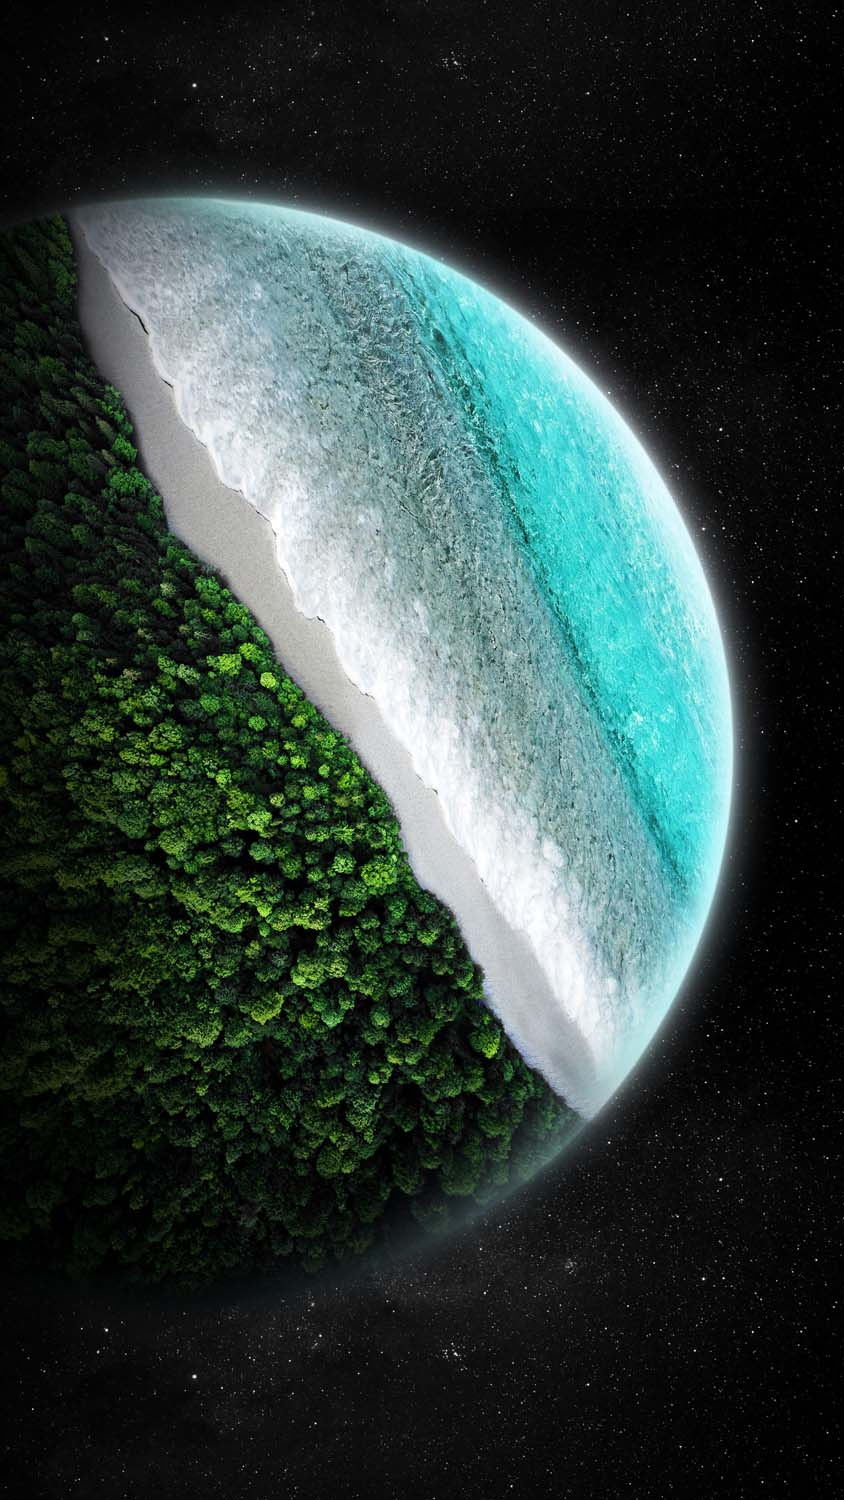 Green Planet  iPhone and Android Wallpaper  Iphone wallpaper universe  Best iphone wallpapers Wallpaper earth